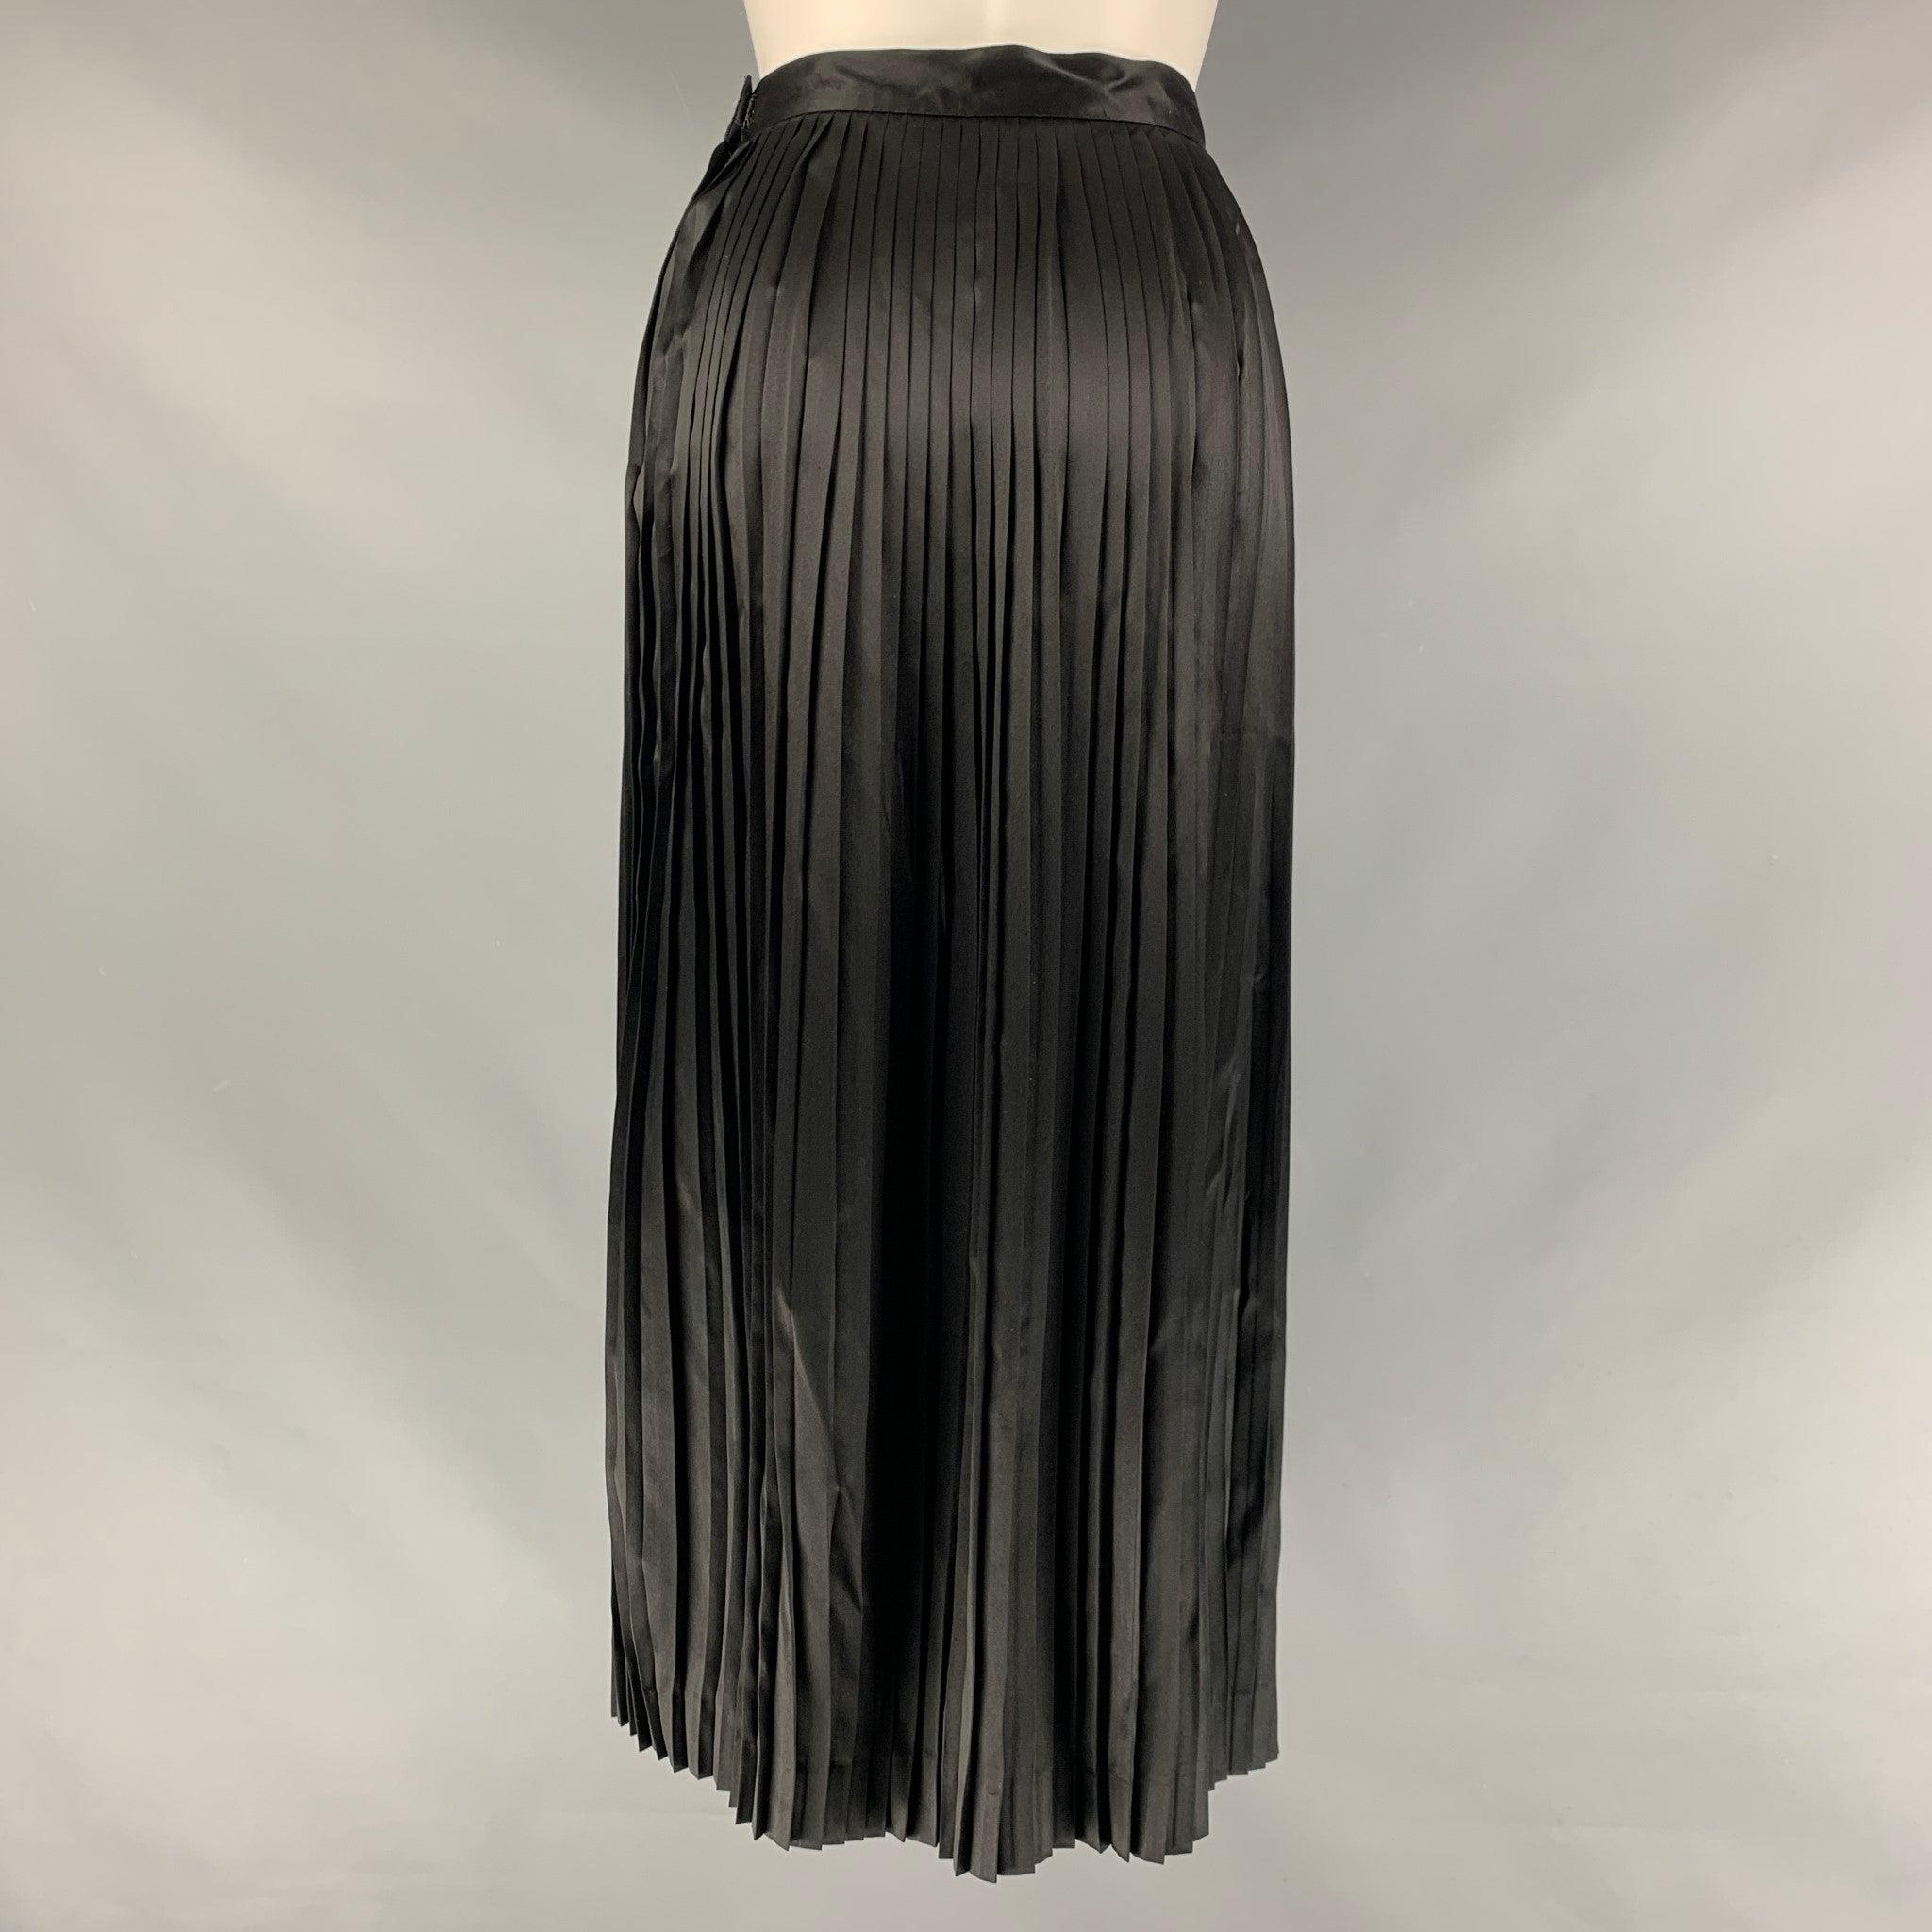 CHRISTIAN DIOR Size 6 Black Silk Pleated Mid-Calf Skirt In Excellent Condition For Sale In San Francisco, CA